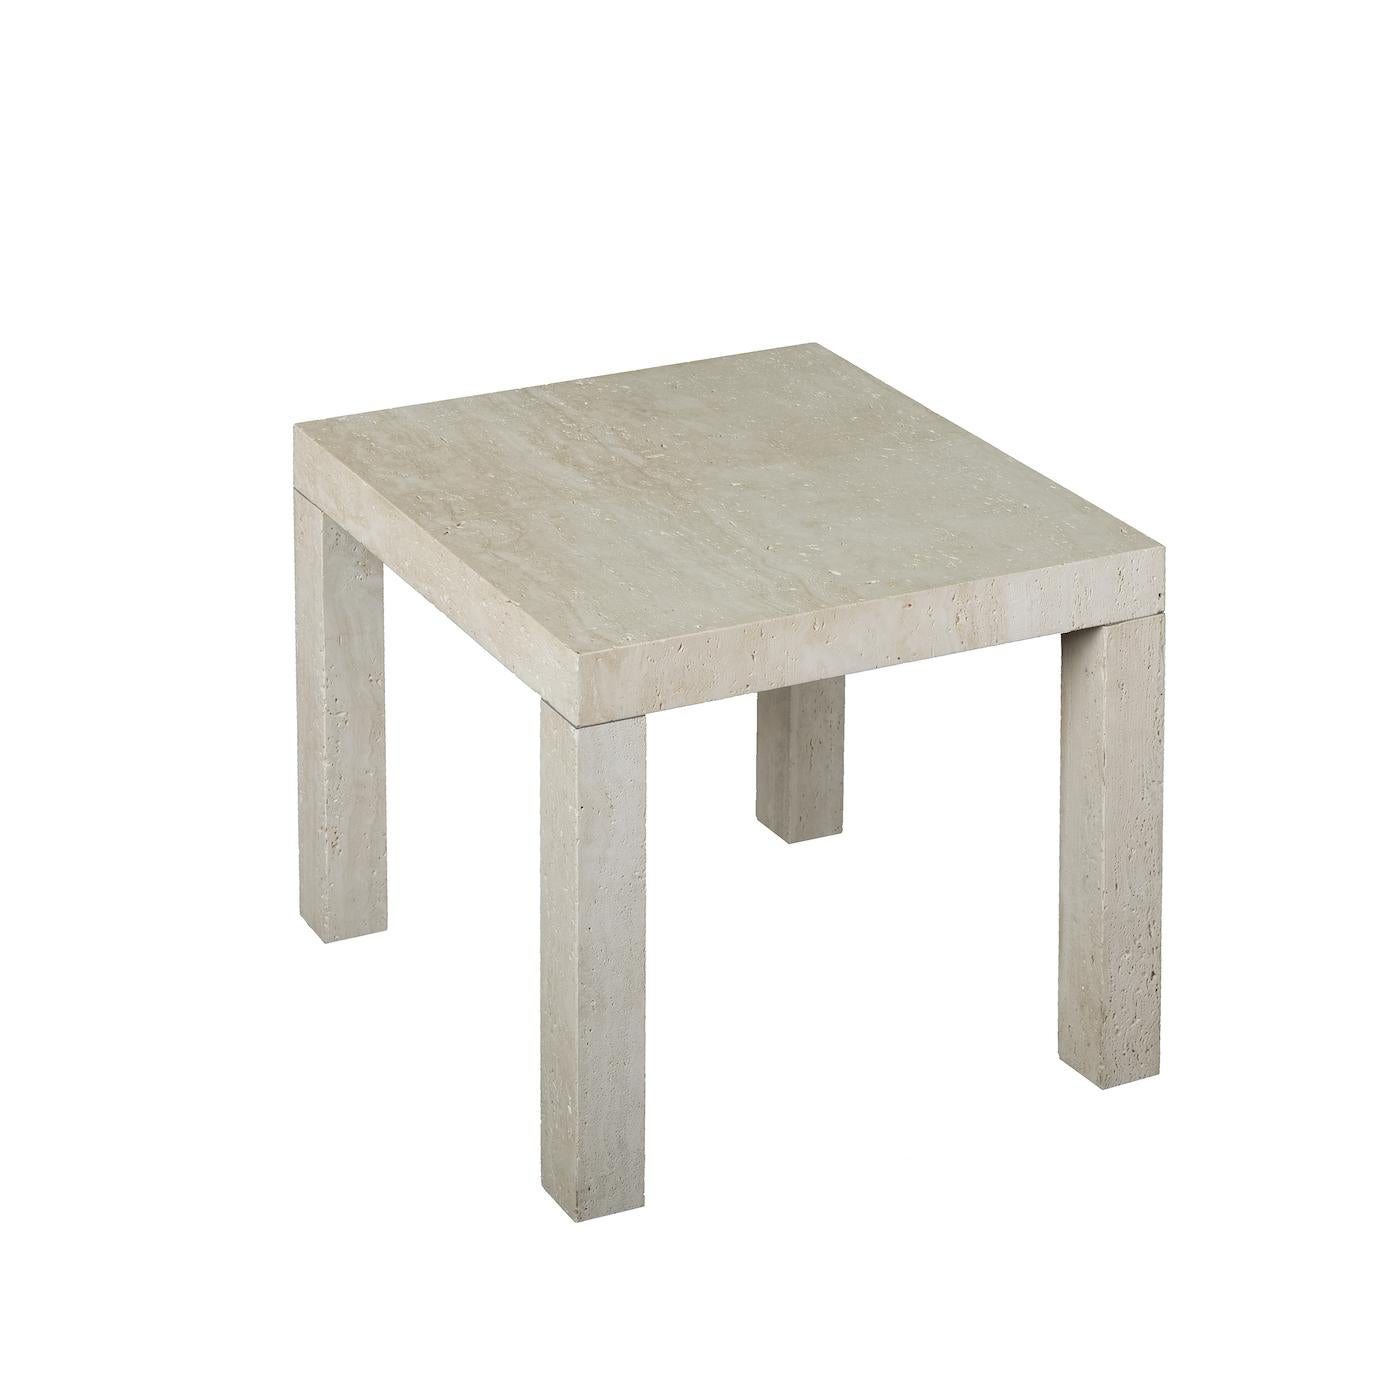 Entirely handcrafted of beige-gray Travertine marble with a smooth, polished finish, this versatile table has the perfect shape and size to add a functional and elegant accent in any room. The square top is mounted on four solid, rectangular legs